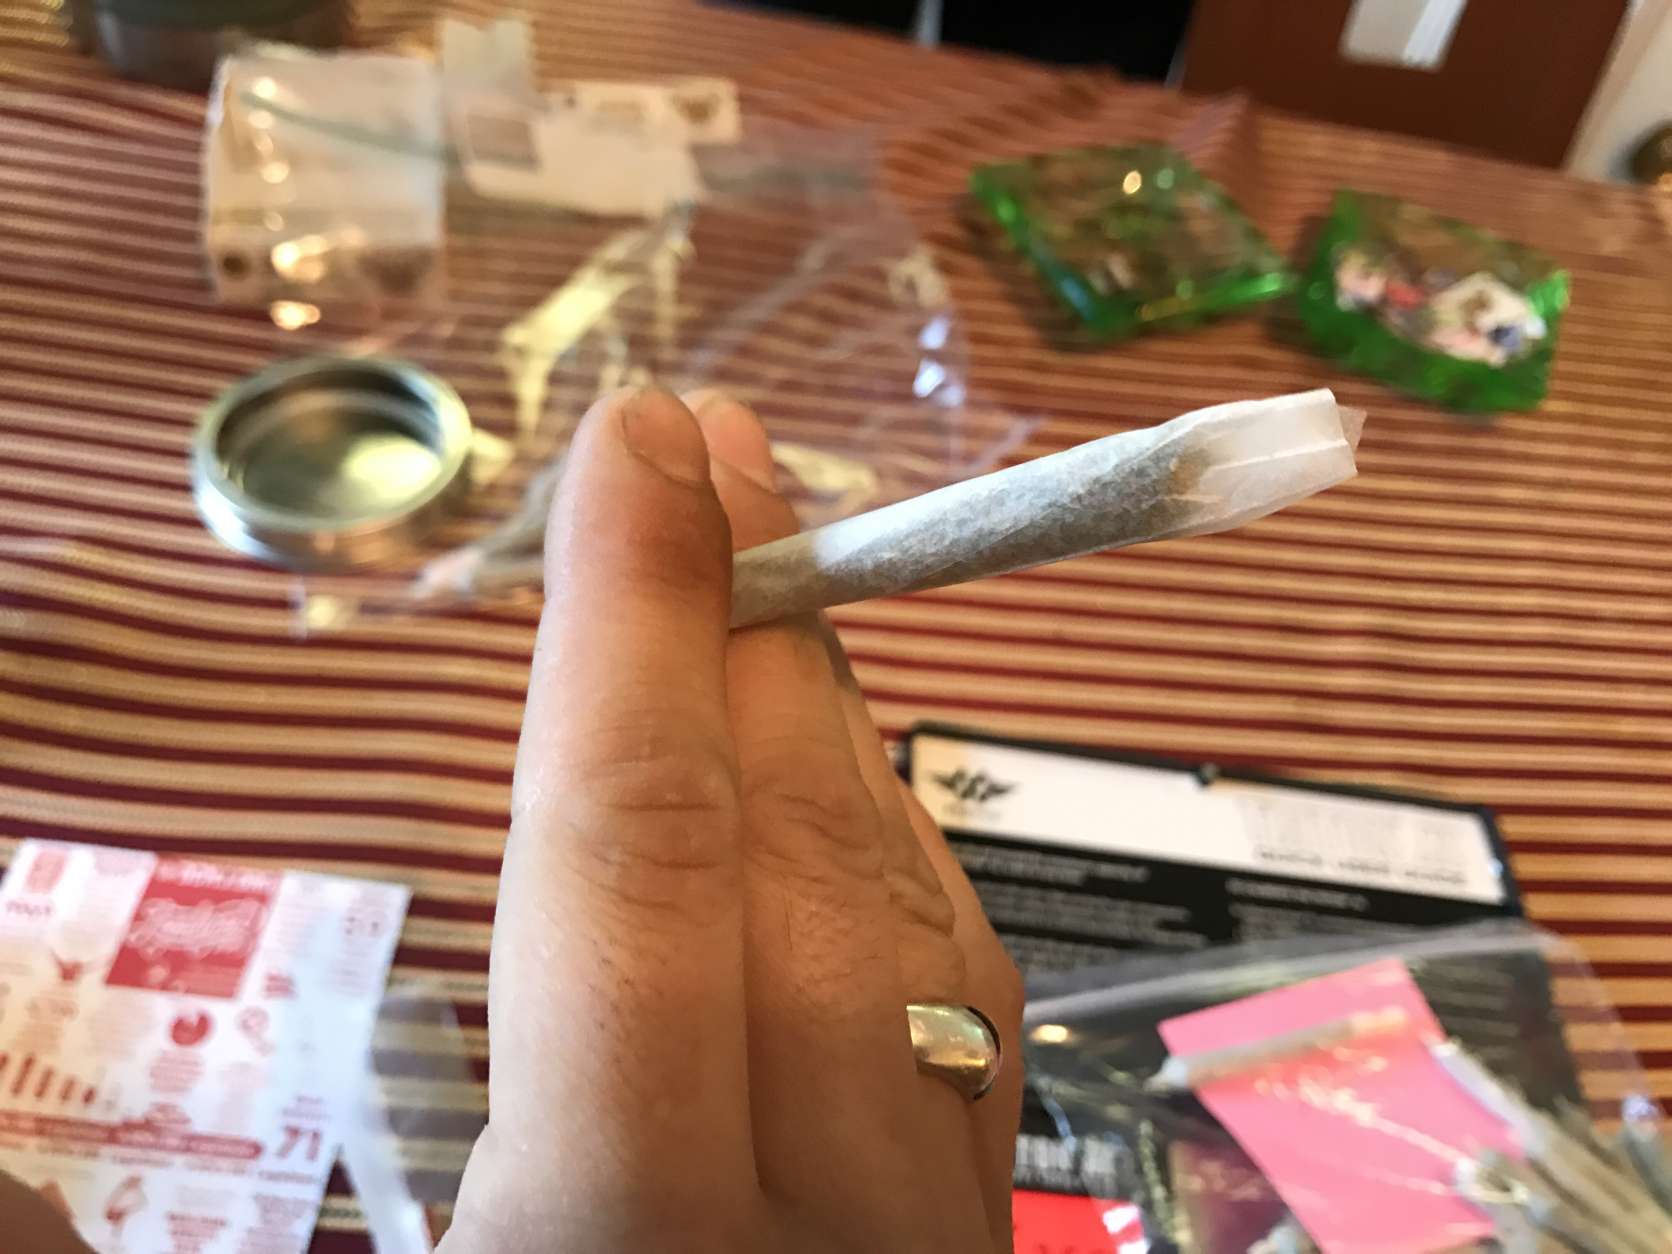 It is legal to possess up to 2 ounces of pot, for smoking in your own home in D.C., but illegal to smoke in public. (Approximately 5000 joints have been rolled, and will be given away on Inauguration Day in D.C. (WTOP/Neal Augenstein)